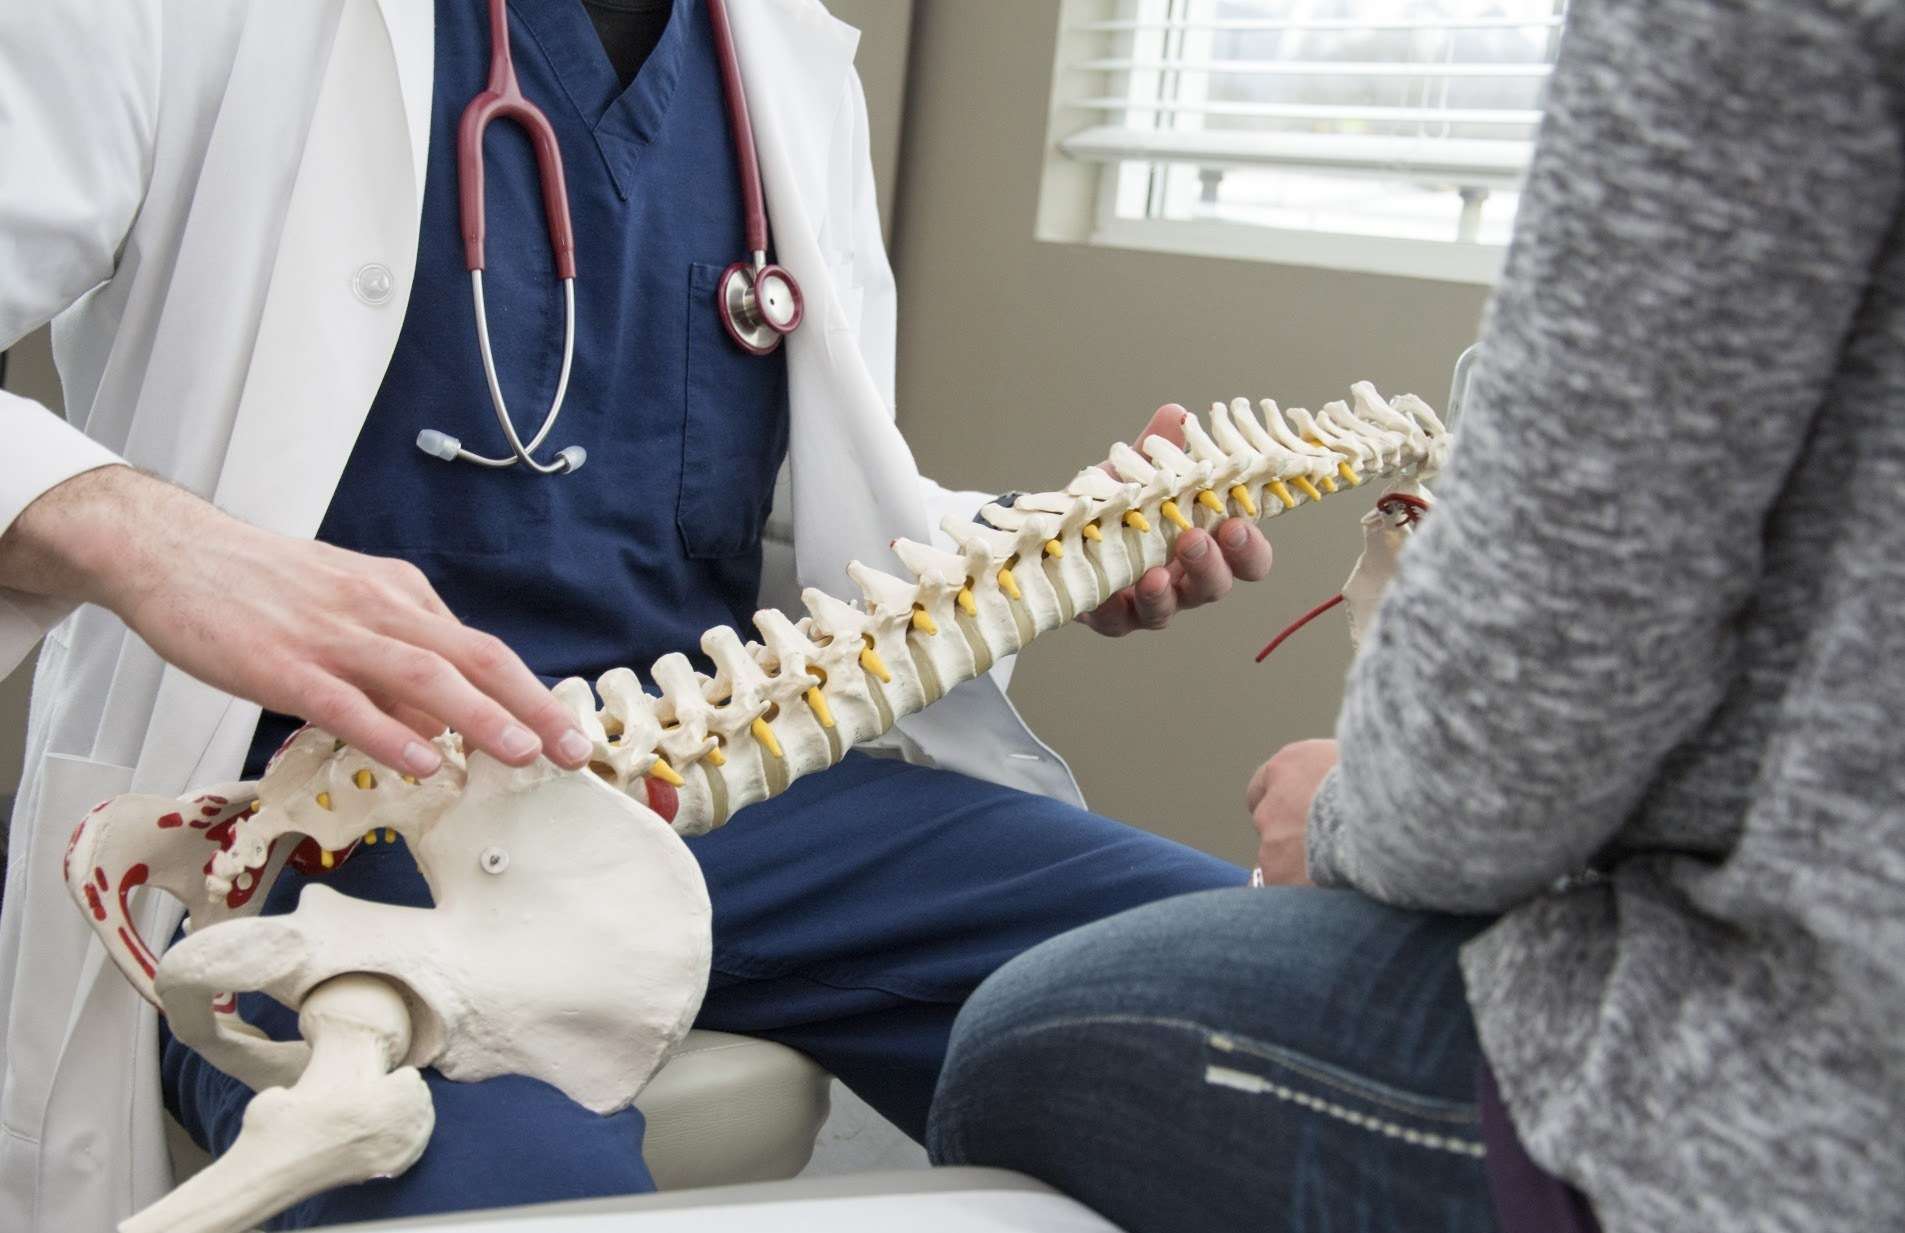 Back Pain From Sitting  Possible Reasons and Treatments - NJ's Top  Orthopedic Spine & Pain Management Center